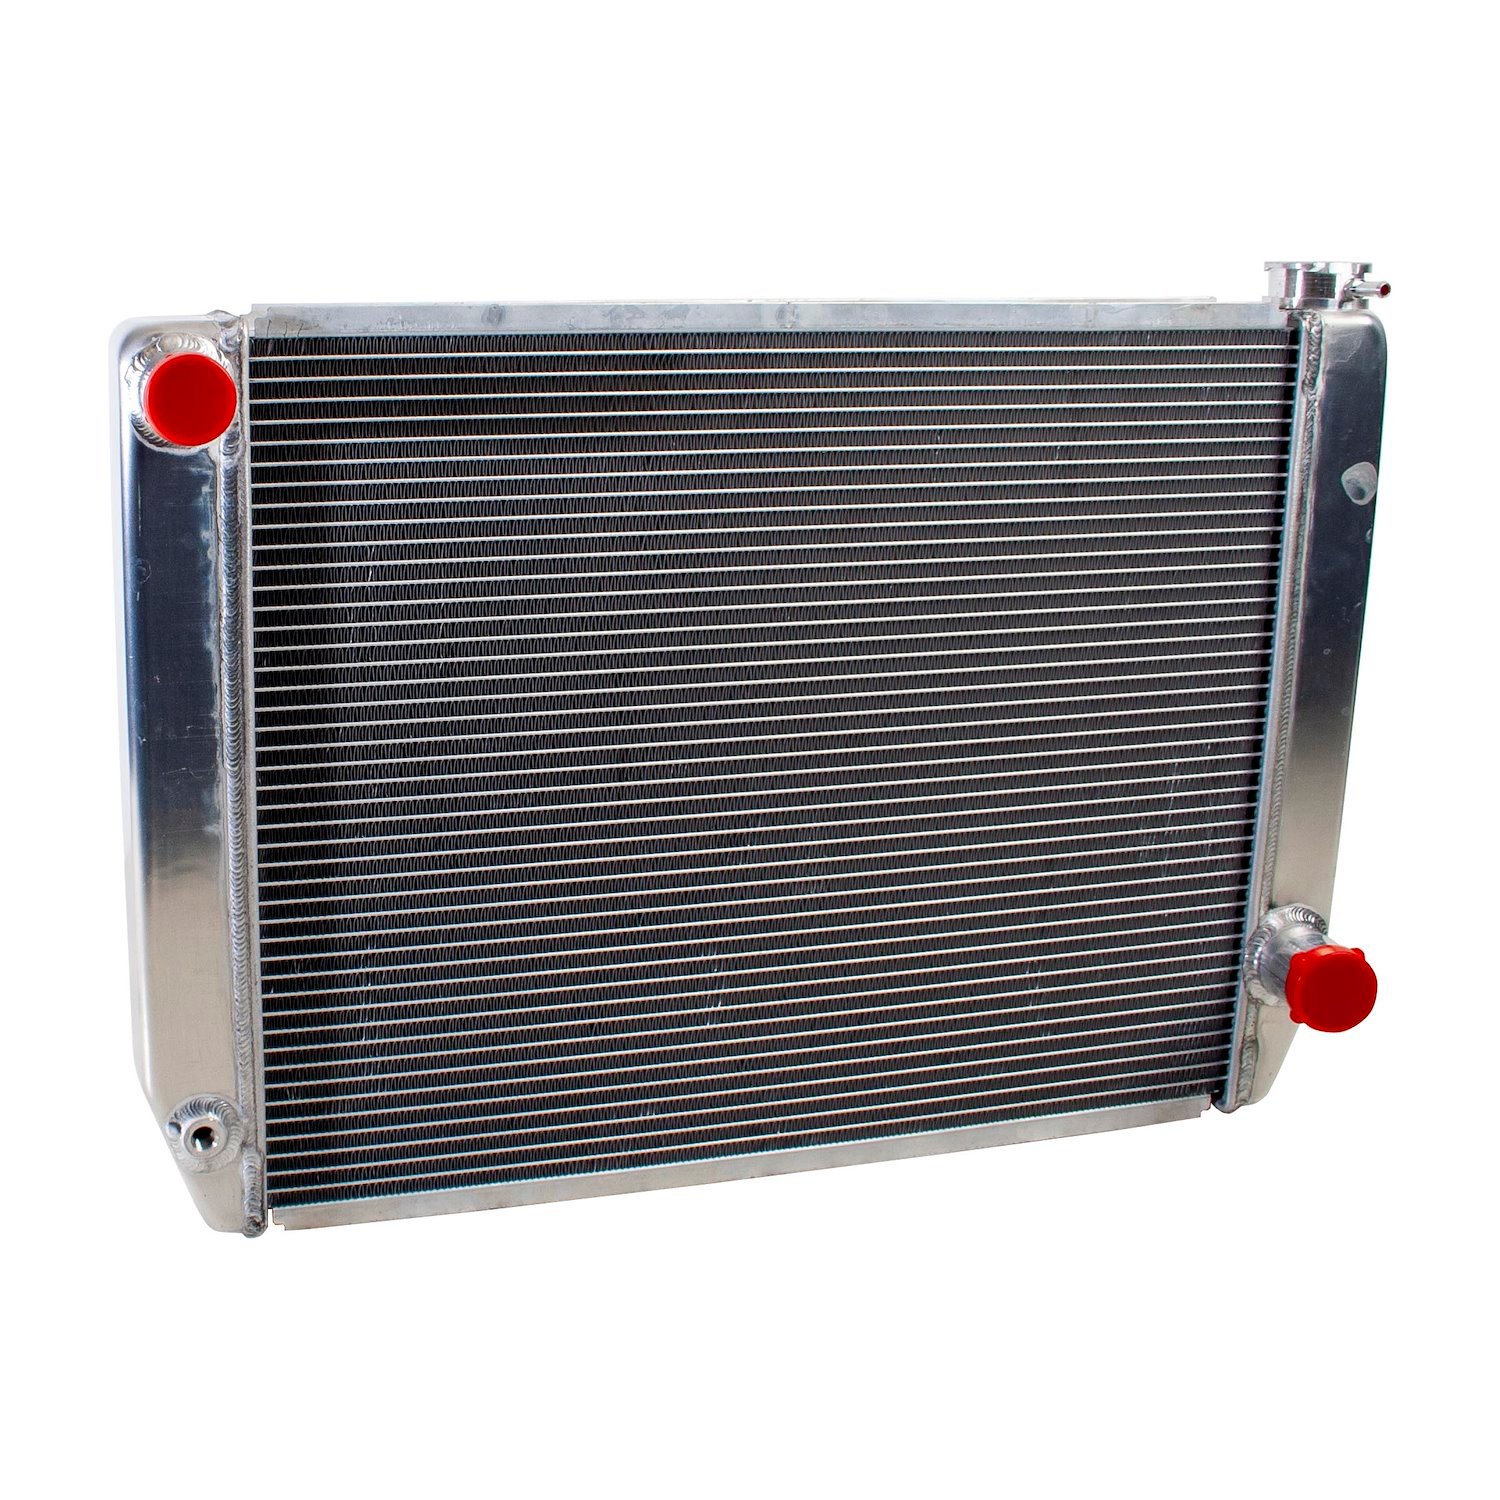 ClassicCool Universal Fit Radiator Single Pass Crossflow Design 27.50" x 19" without Transmission Cooler